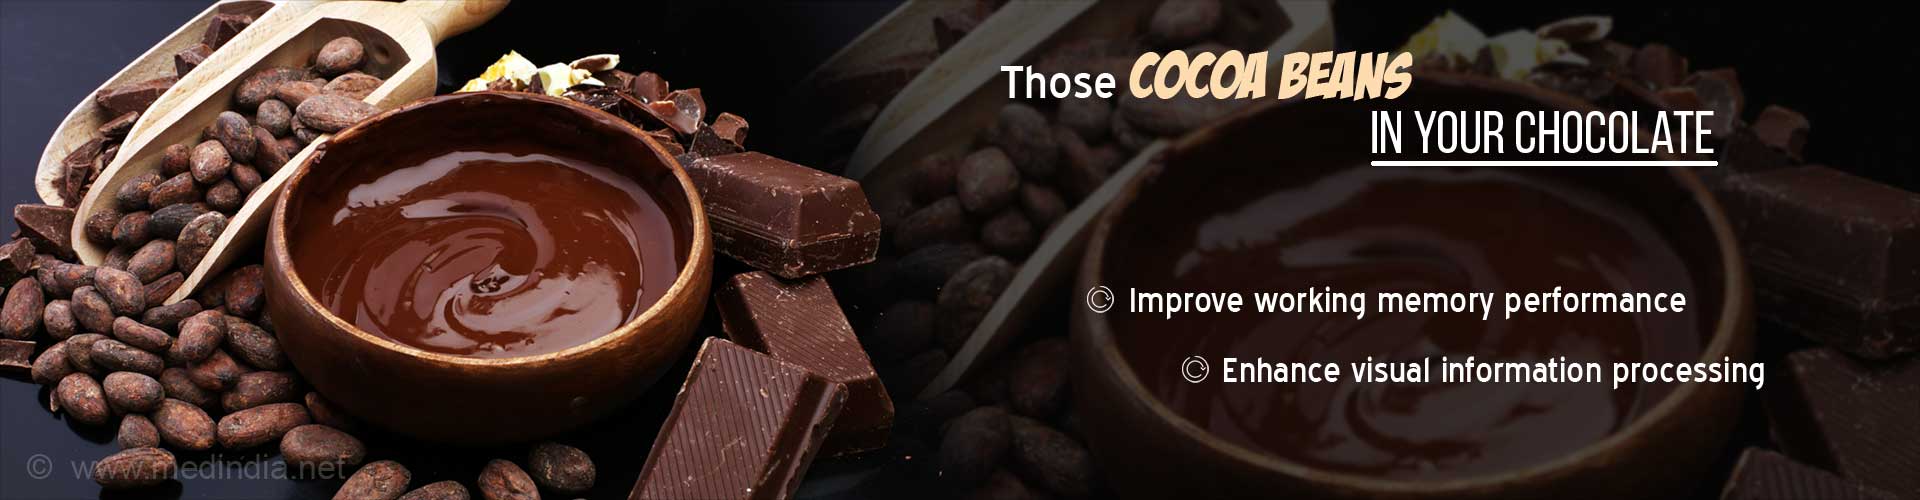 Those cocoa beans in your chocolate
- Improve working memory performance
- Enhance visual information processing